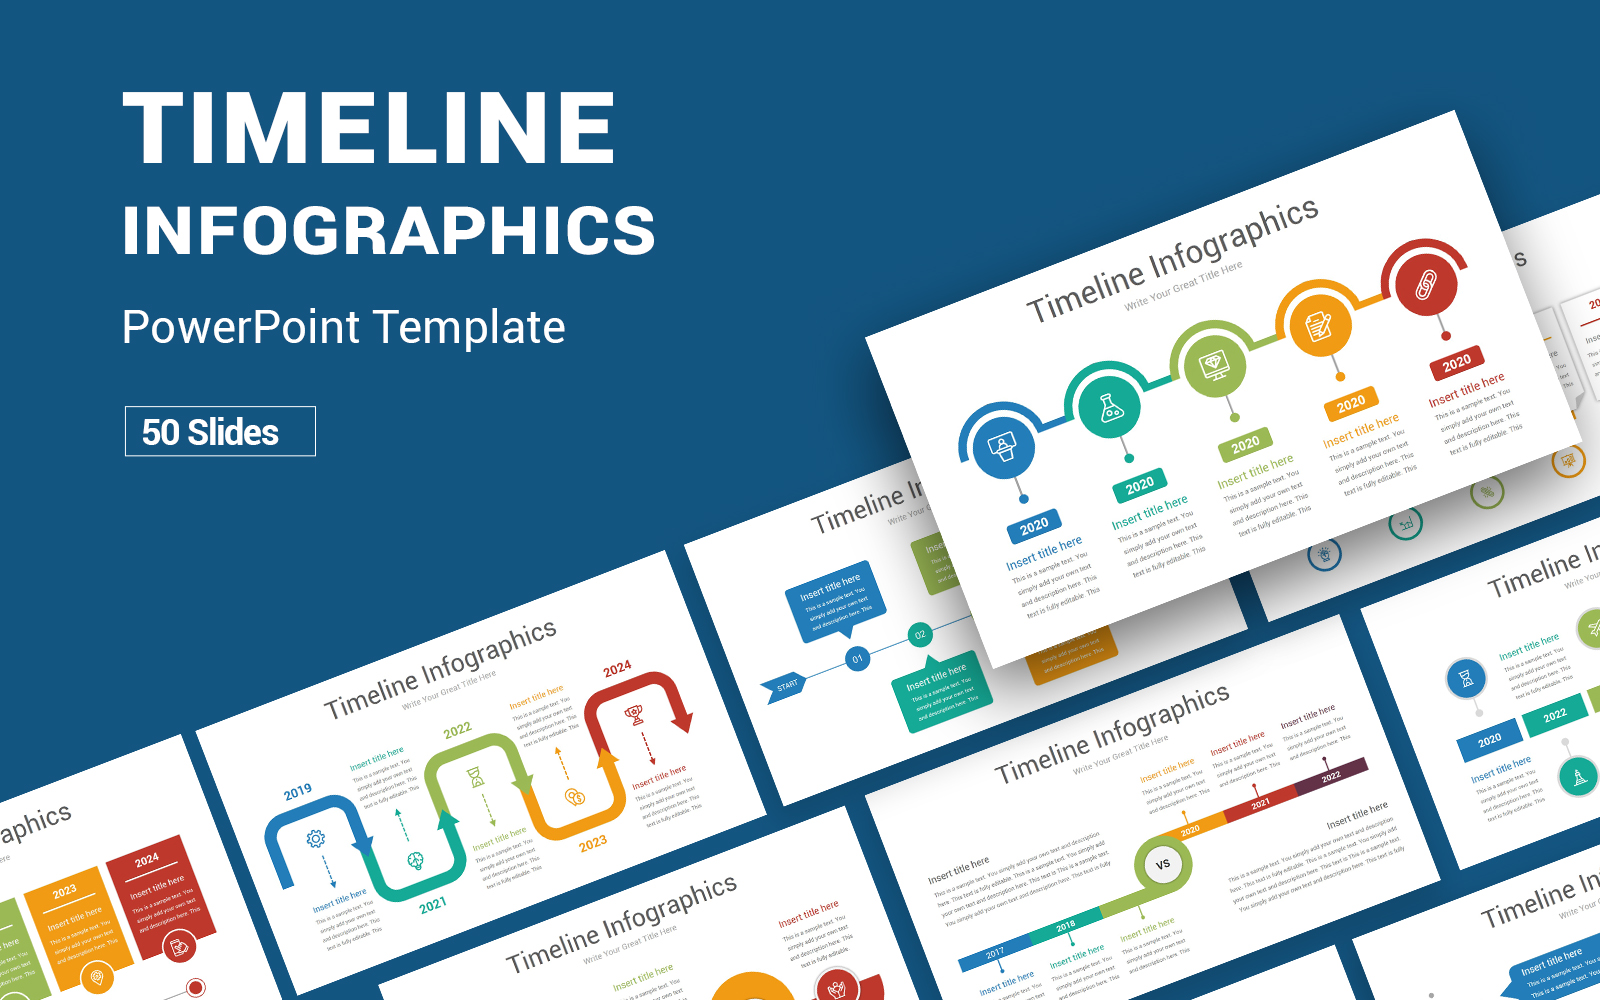 Timeline - Infographic PowerPoint Template